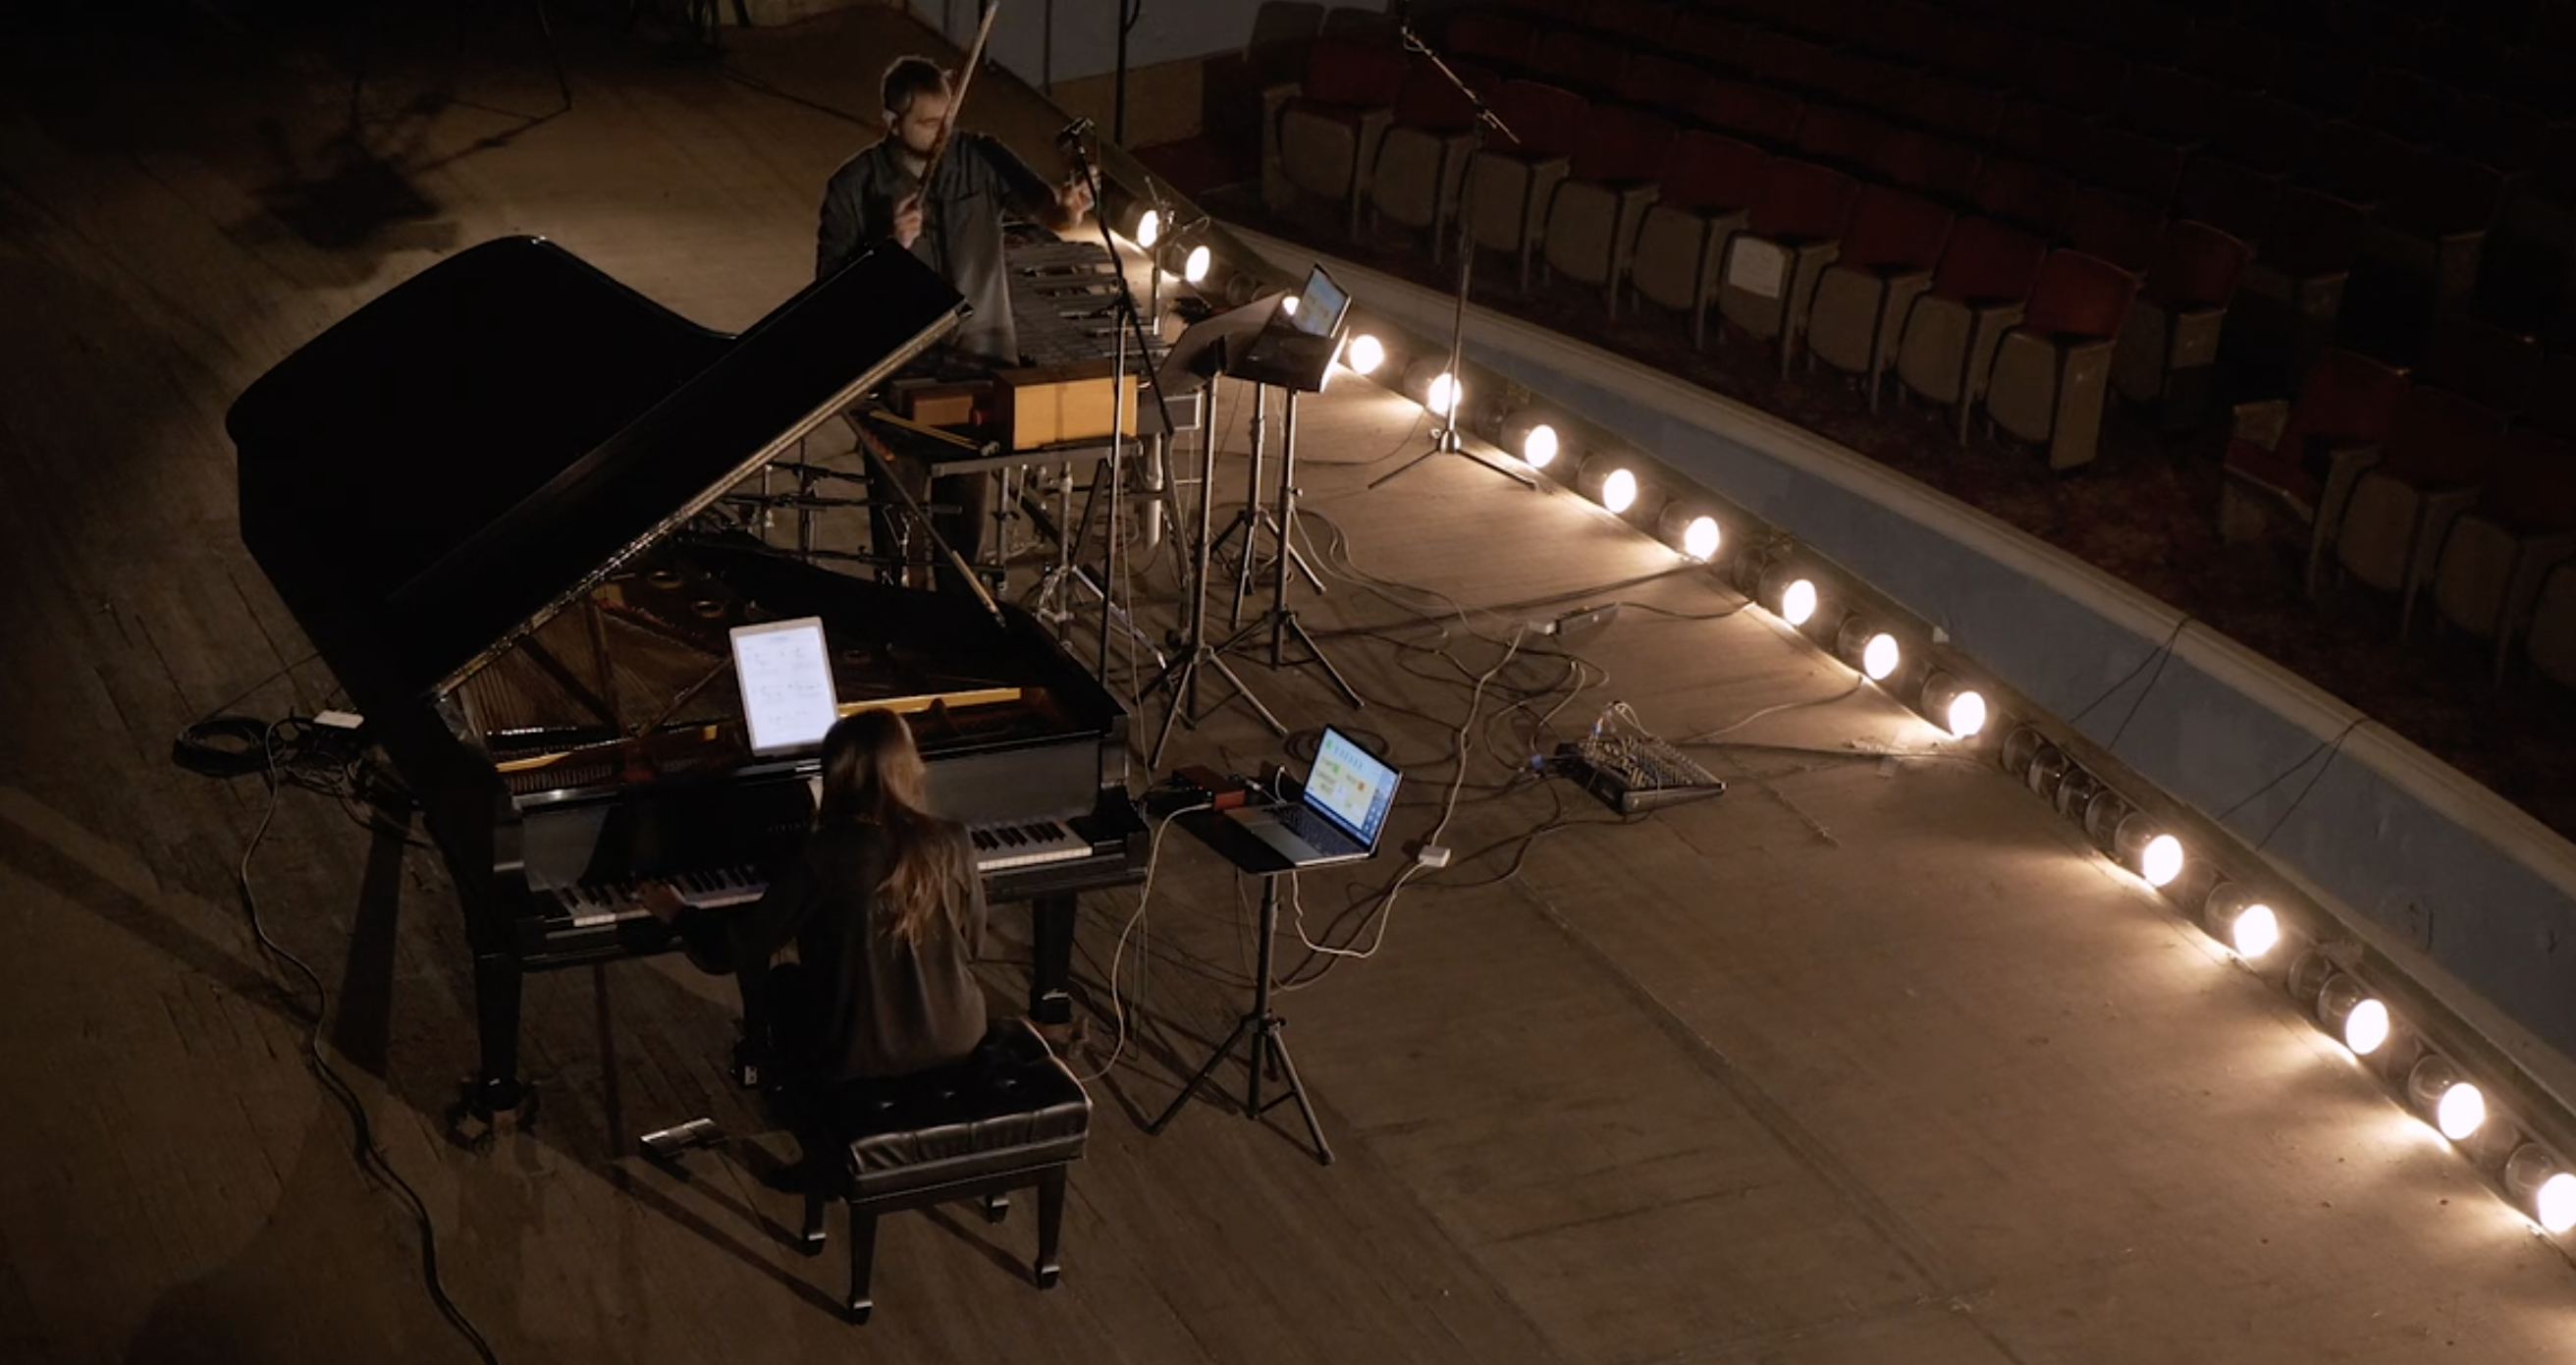 view from above of pianist at a grand piano and percussion setup with stage lights shining upward from the right side